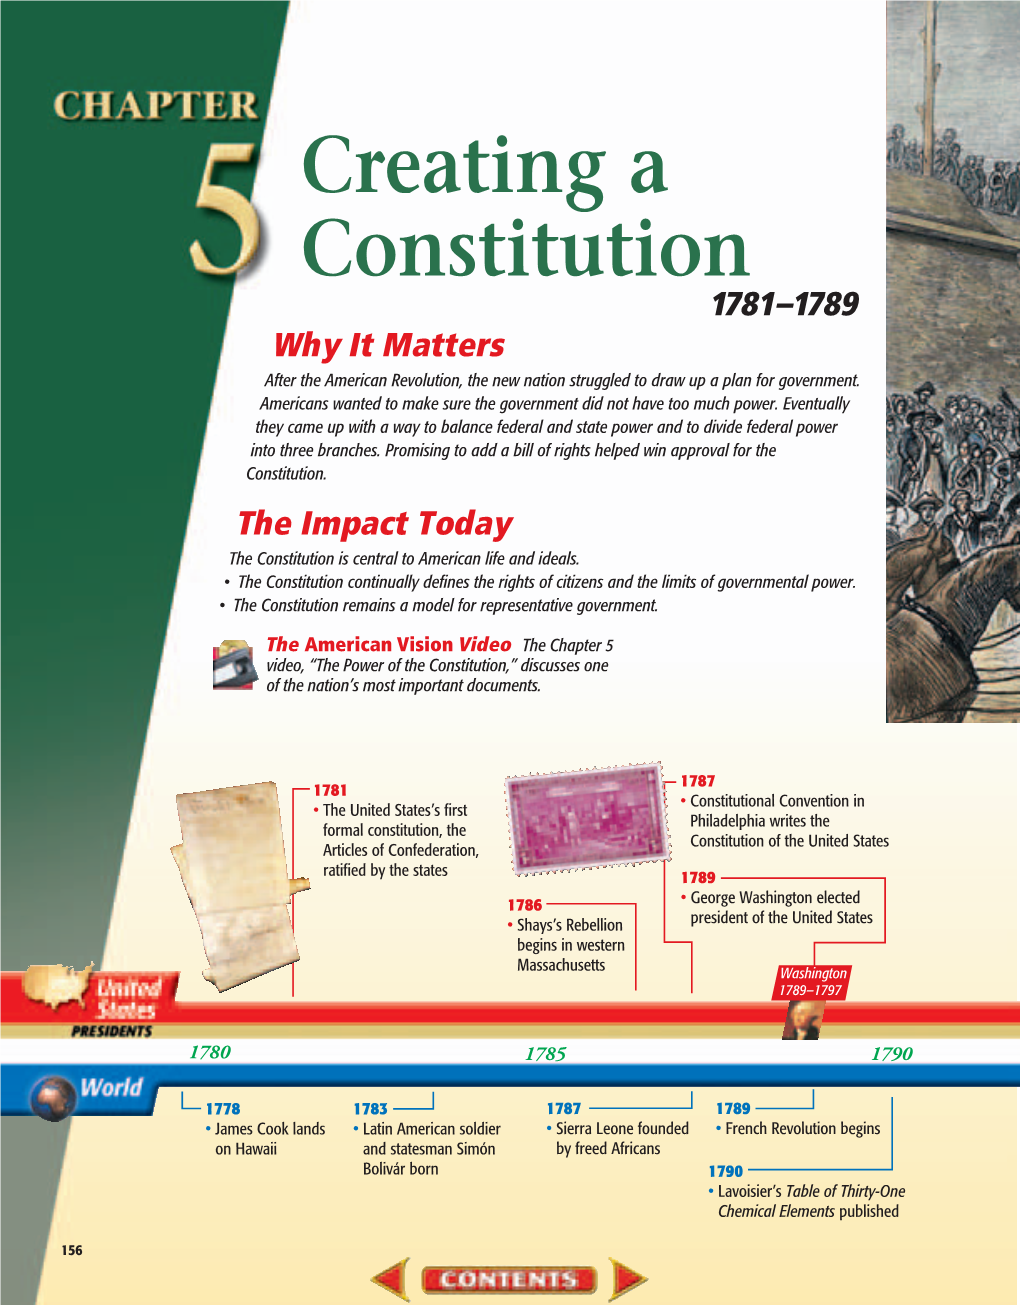 Chapter 5: Creating a Constitution, 1781-1789